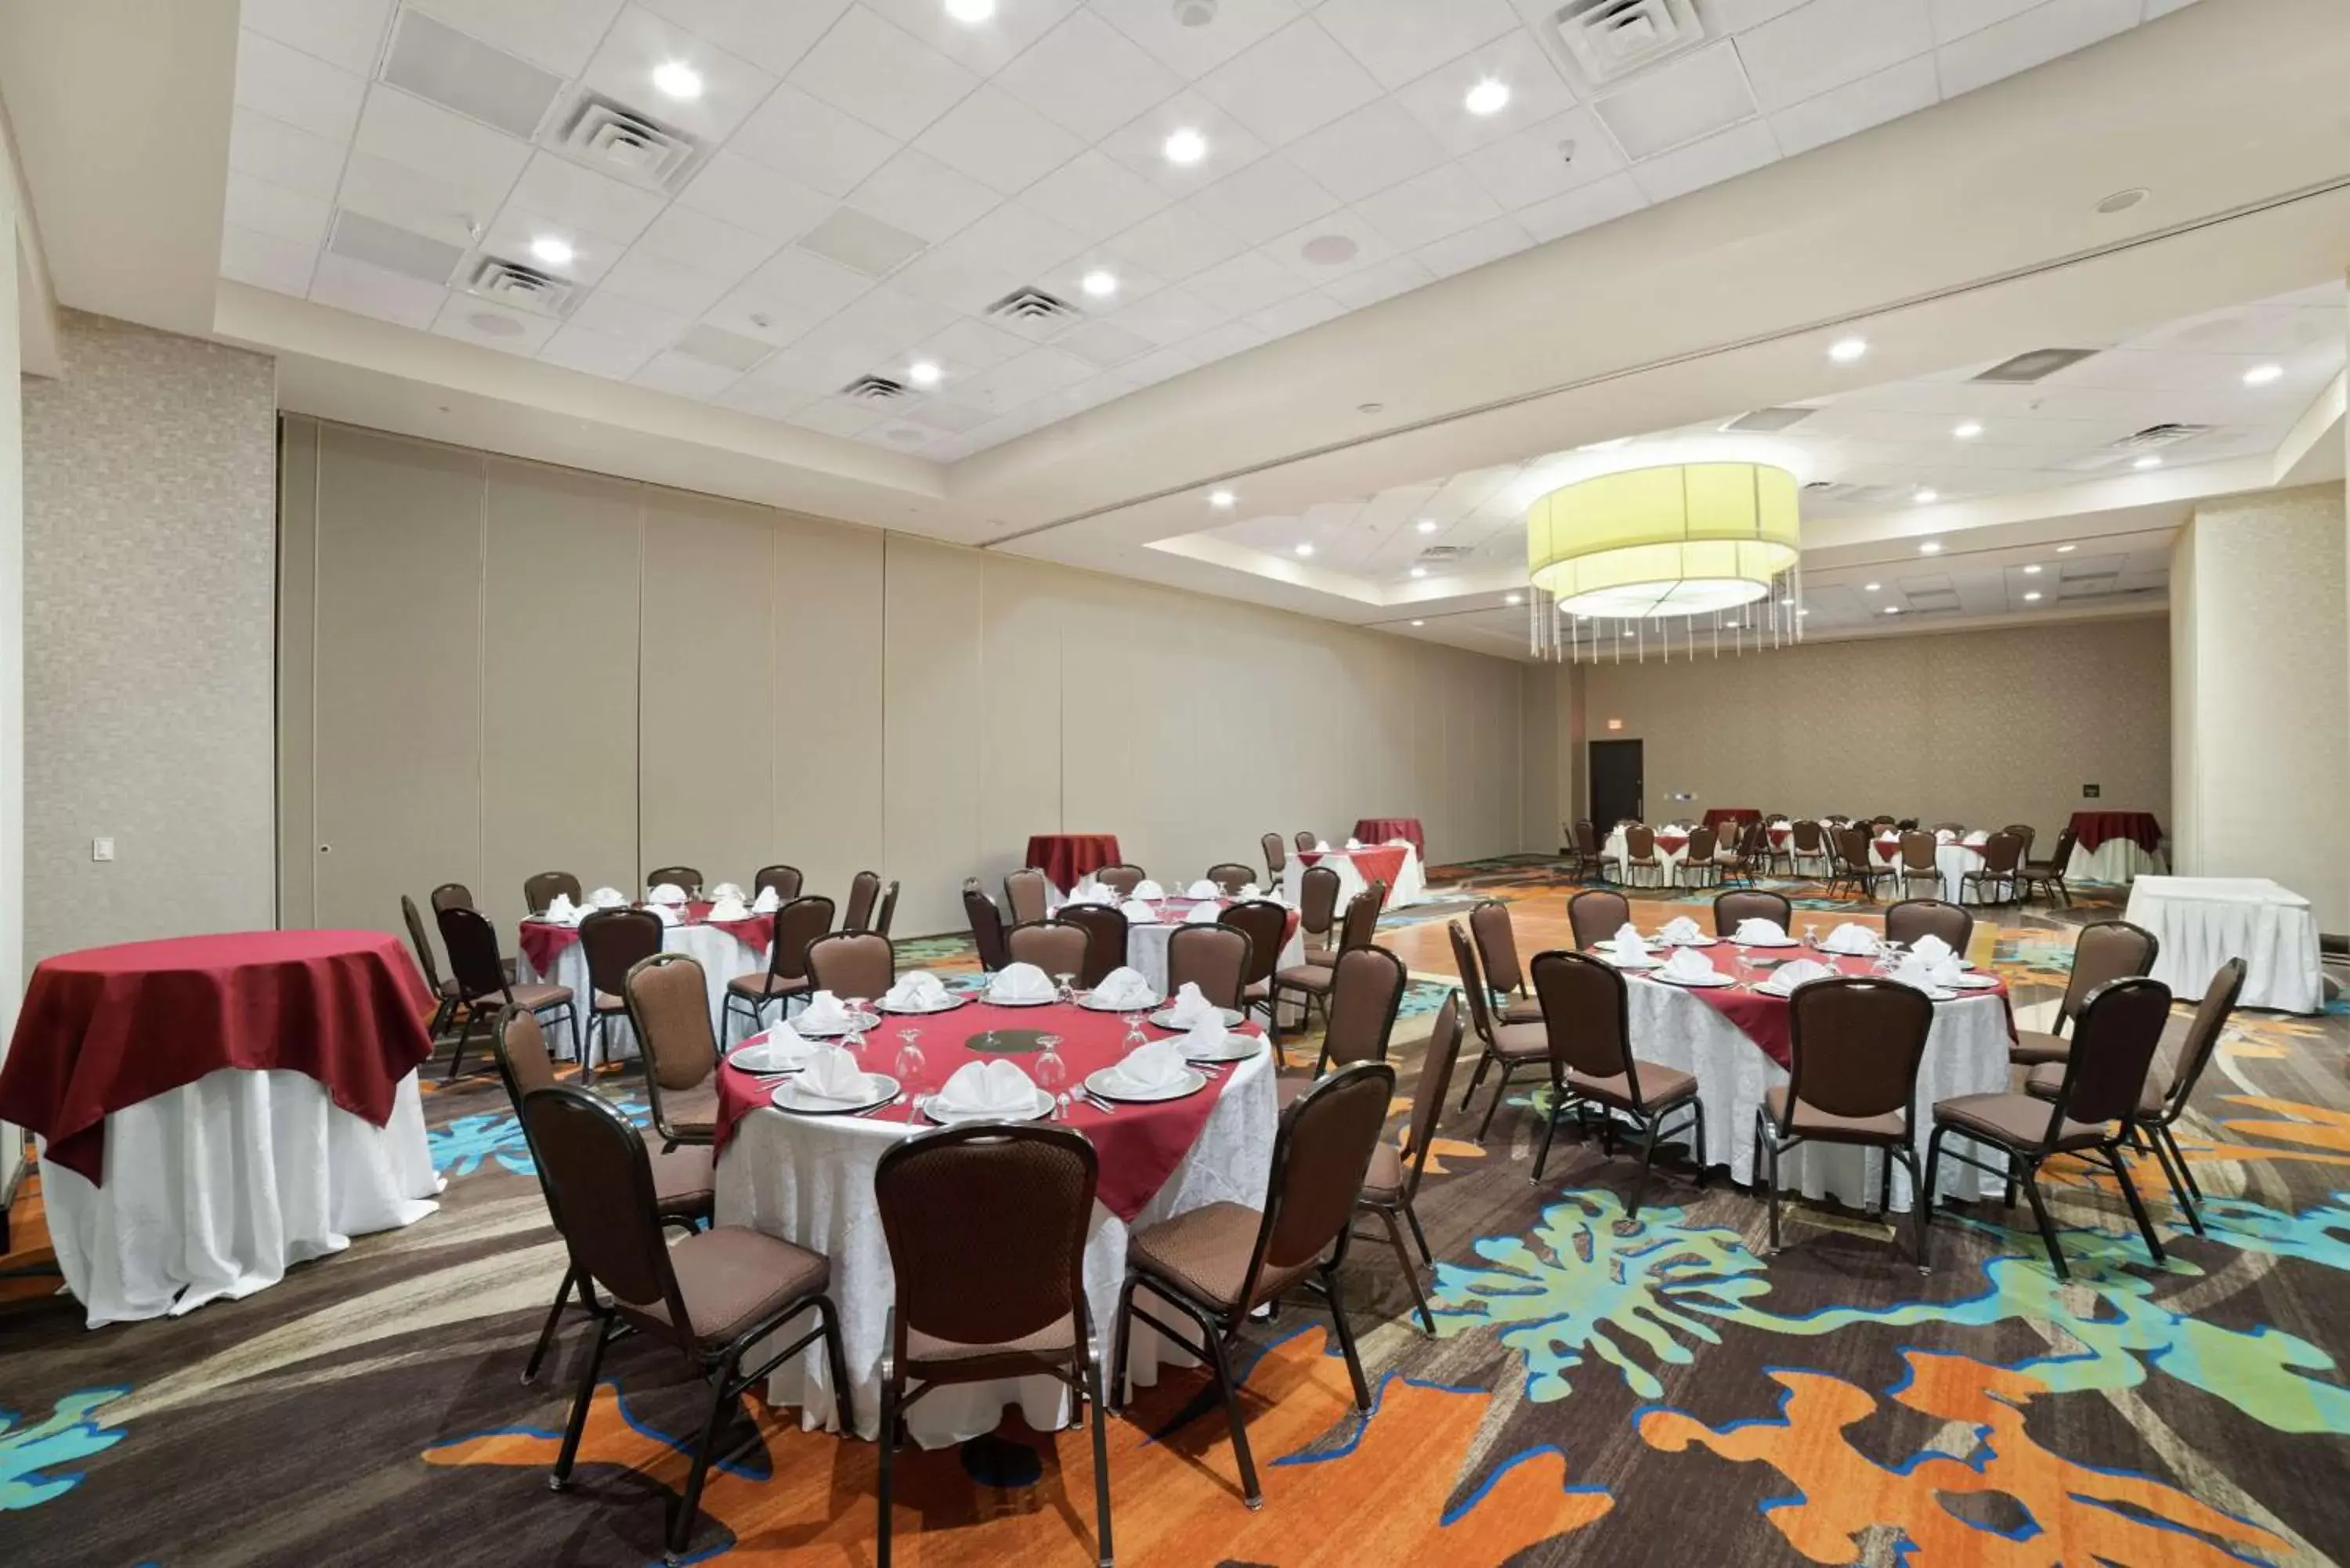 Meeting/conference room, Banquet Facilities in Hilton Garden Inn Lawton-Fort Sill